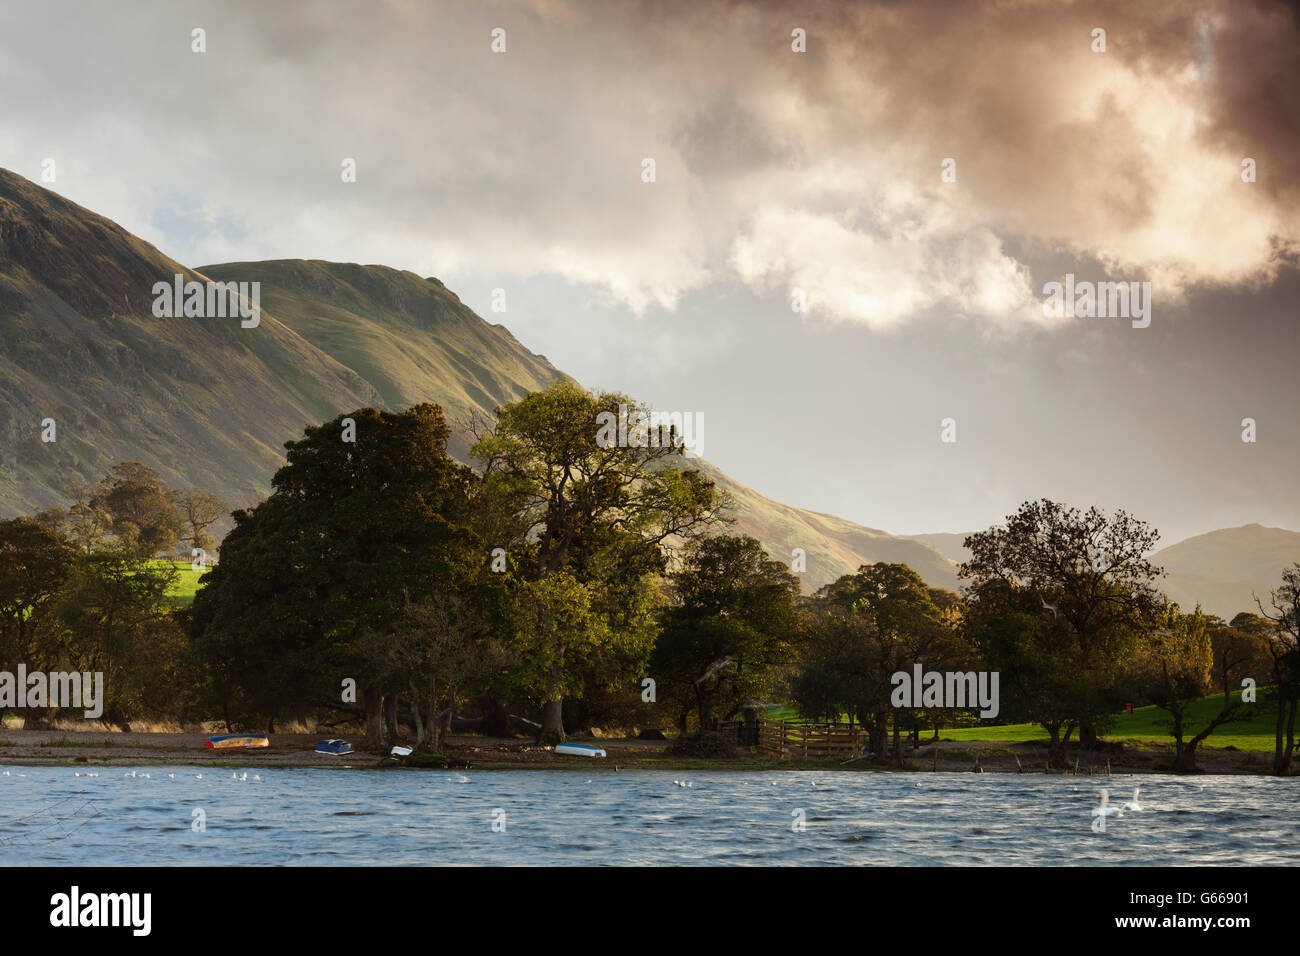 Bonscale Pike with Ullswater, one of the lakes in the Lake District, England, United Kingdom, Europe Stock Photo